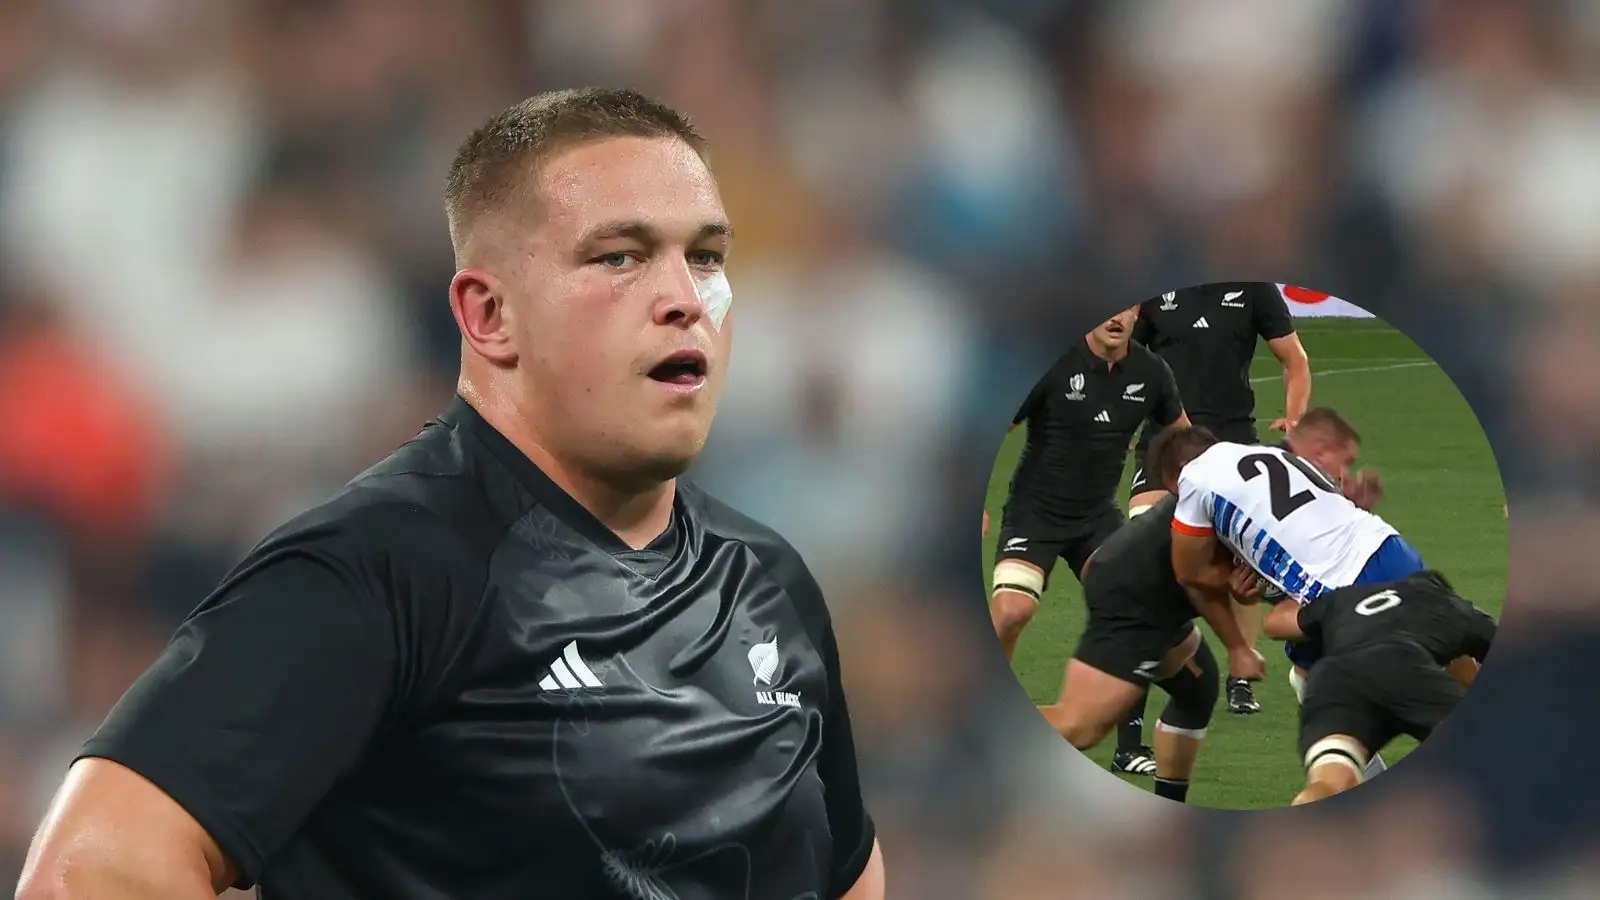 All Blacks prop Ethan de Groot red carded for his tackle during the Rugby World Cup match against Namibia.